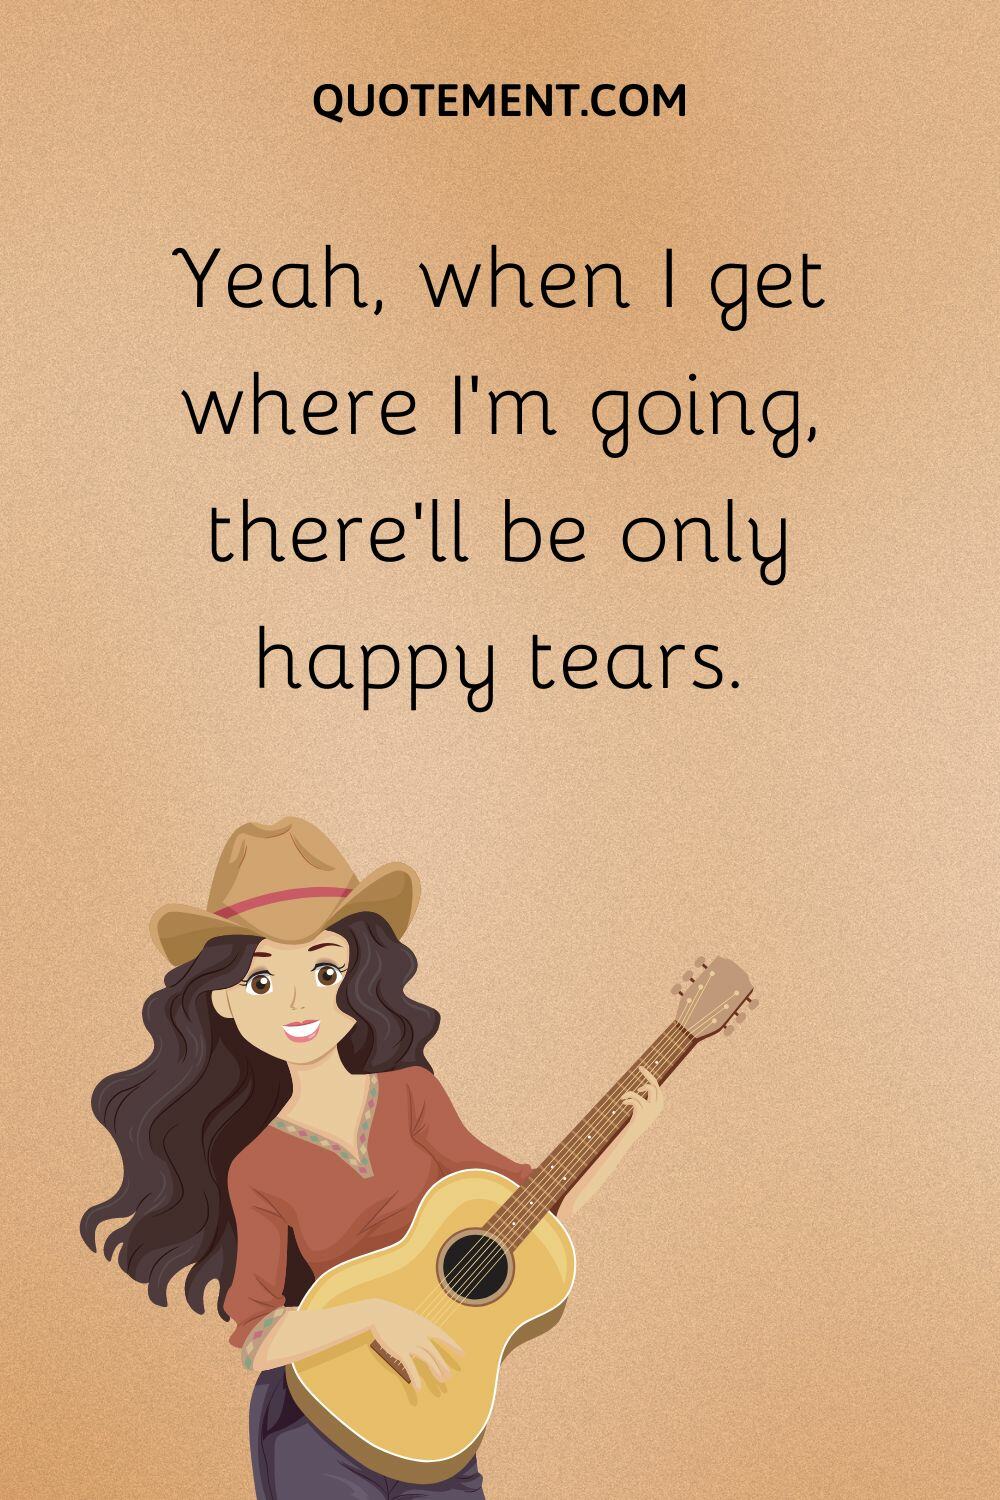 Yeah, when I get where I’m going, there’ll be only happy tears